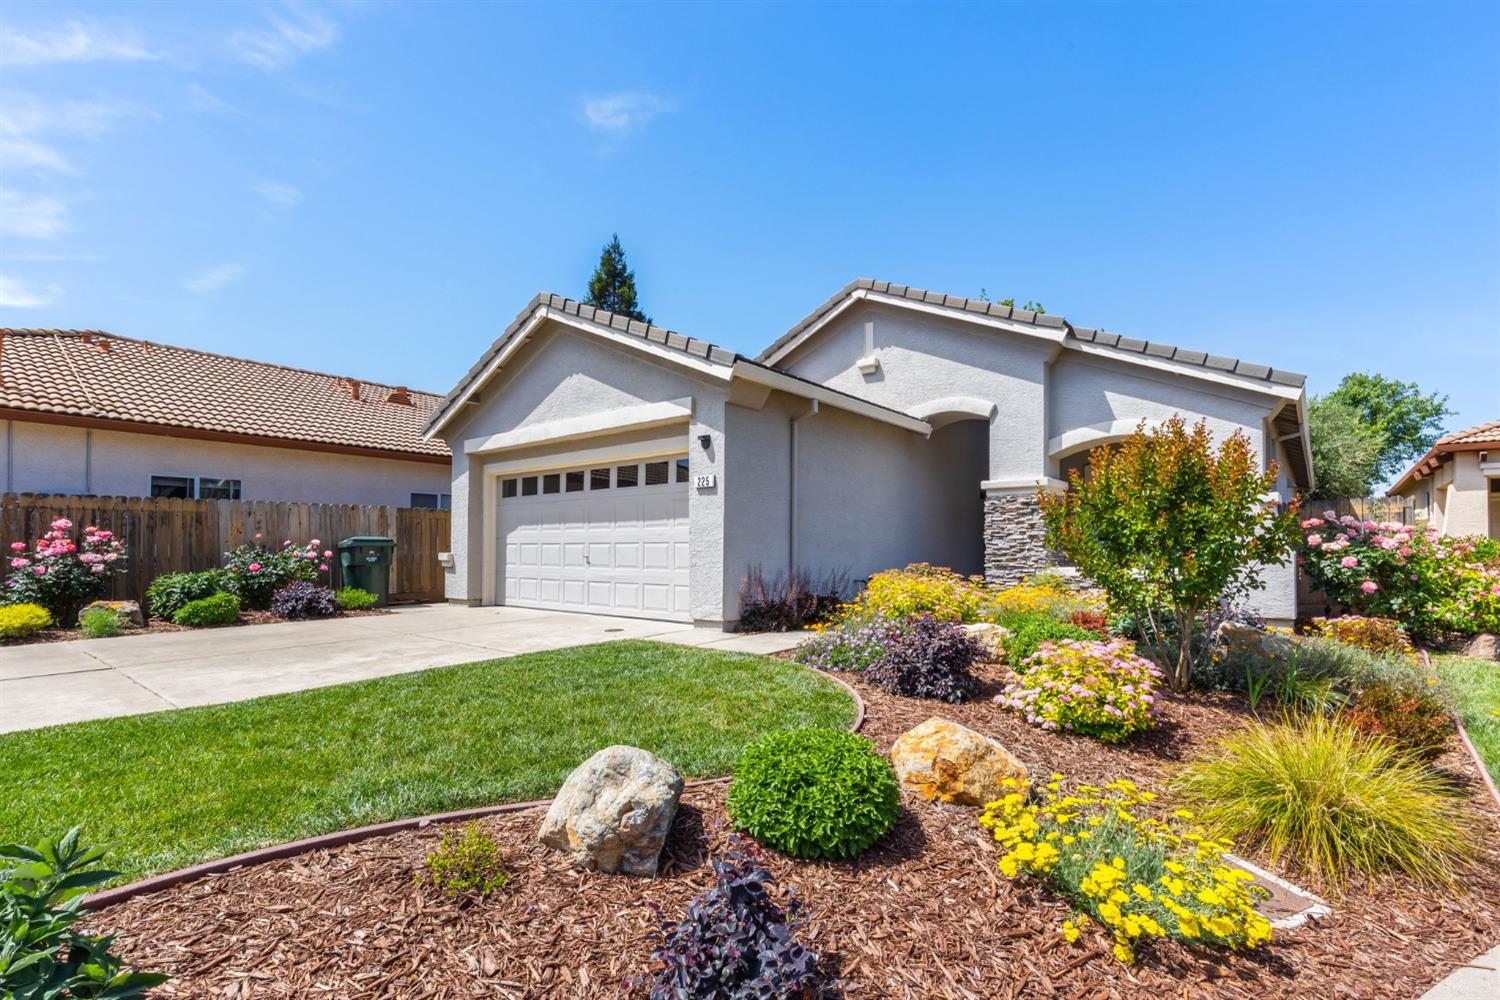 Photo of 225 Blagdon Ct in Roseville, CA